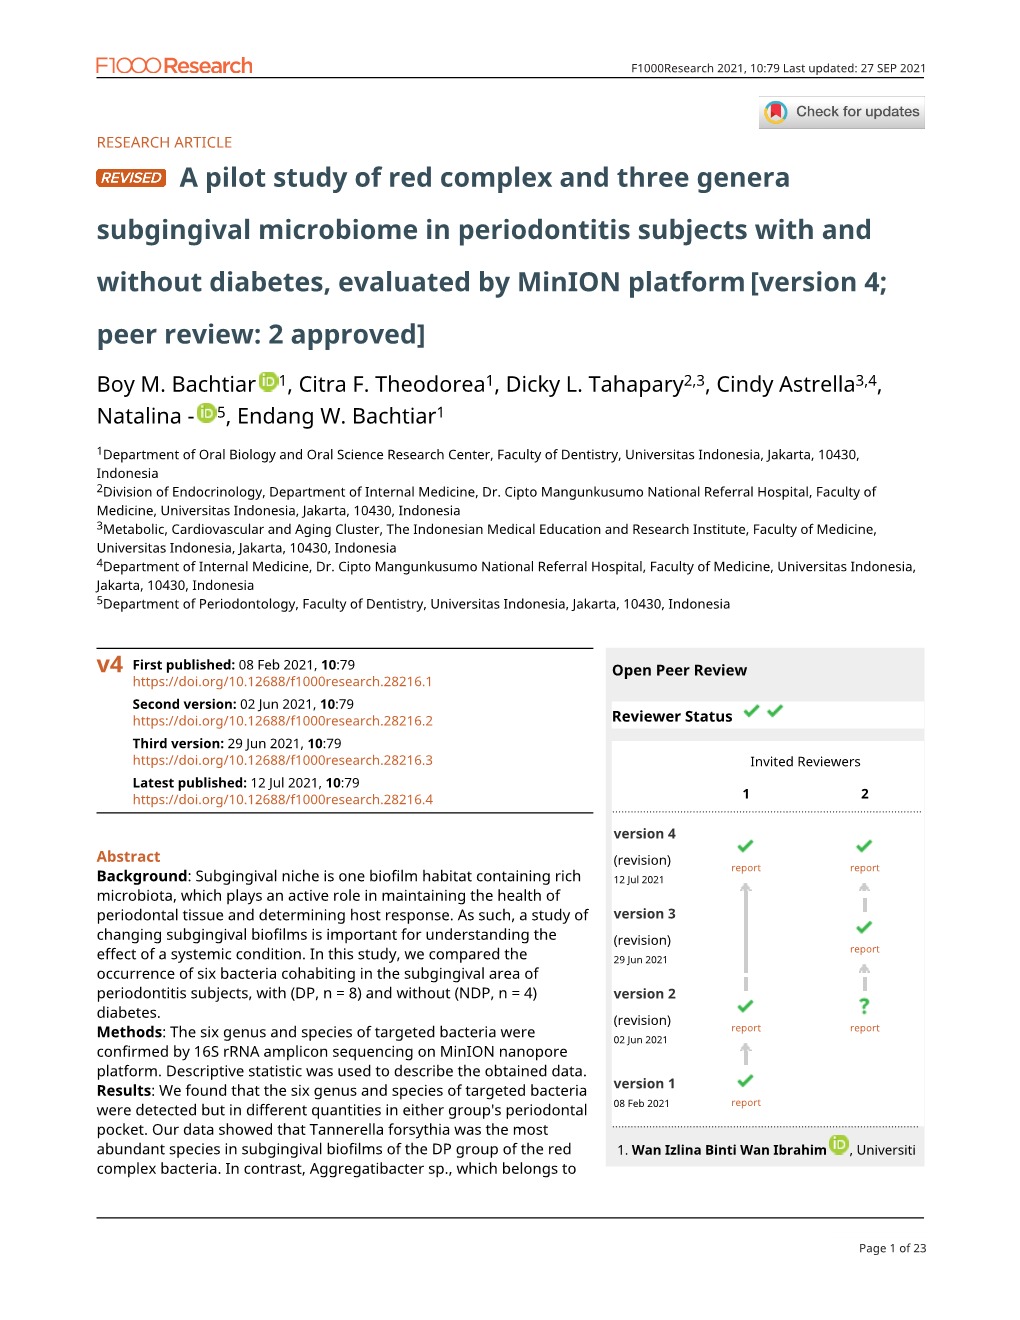 A Pilot Study of Red Complex and Three Genera